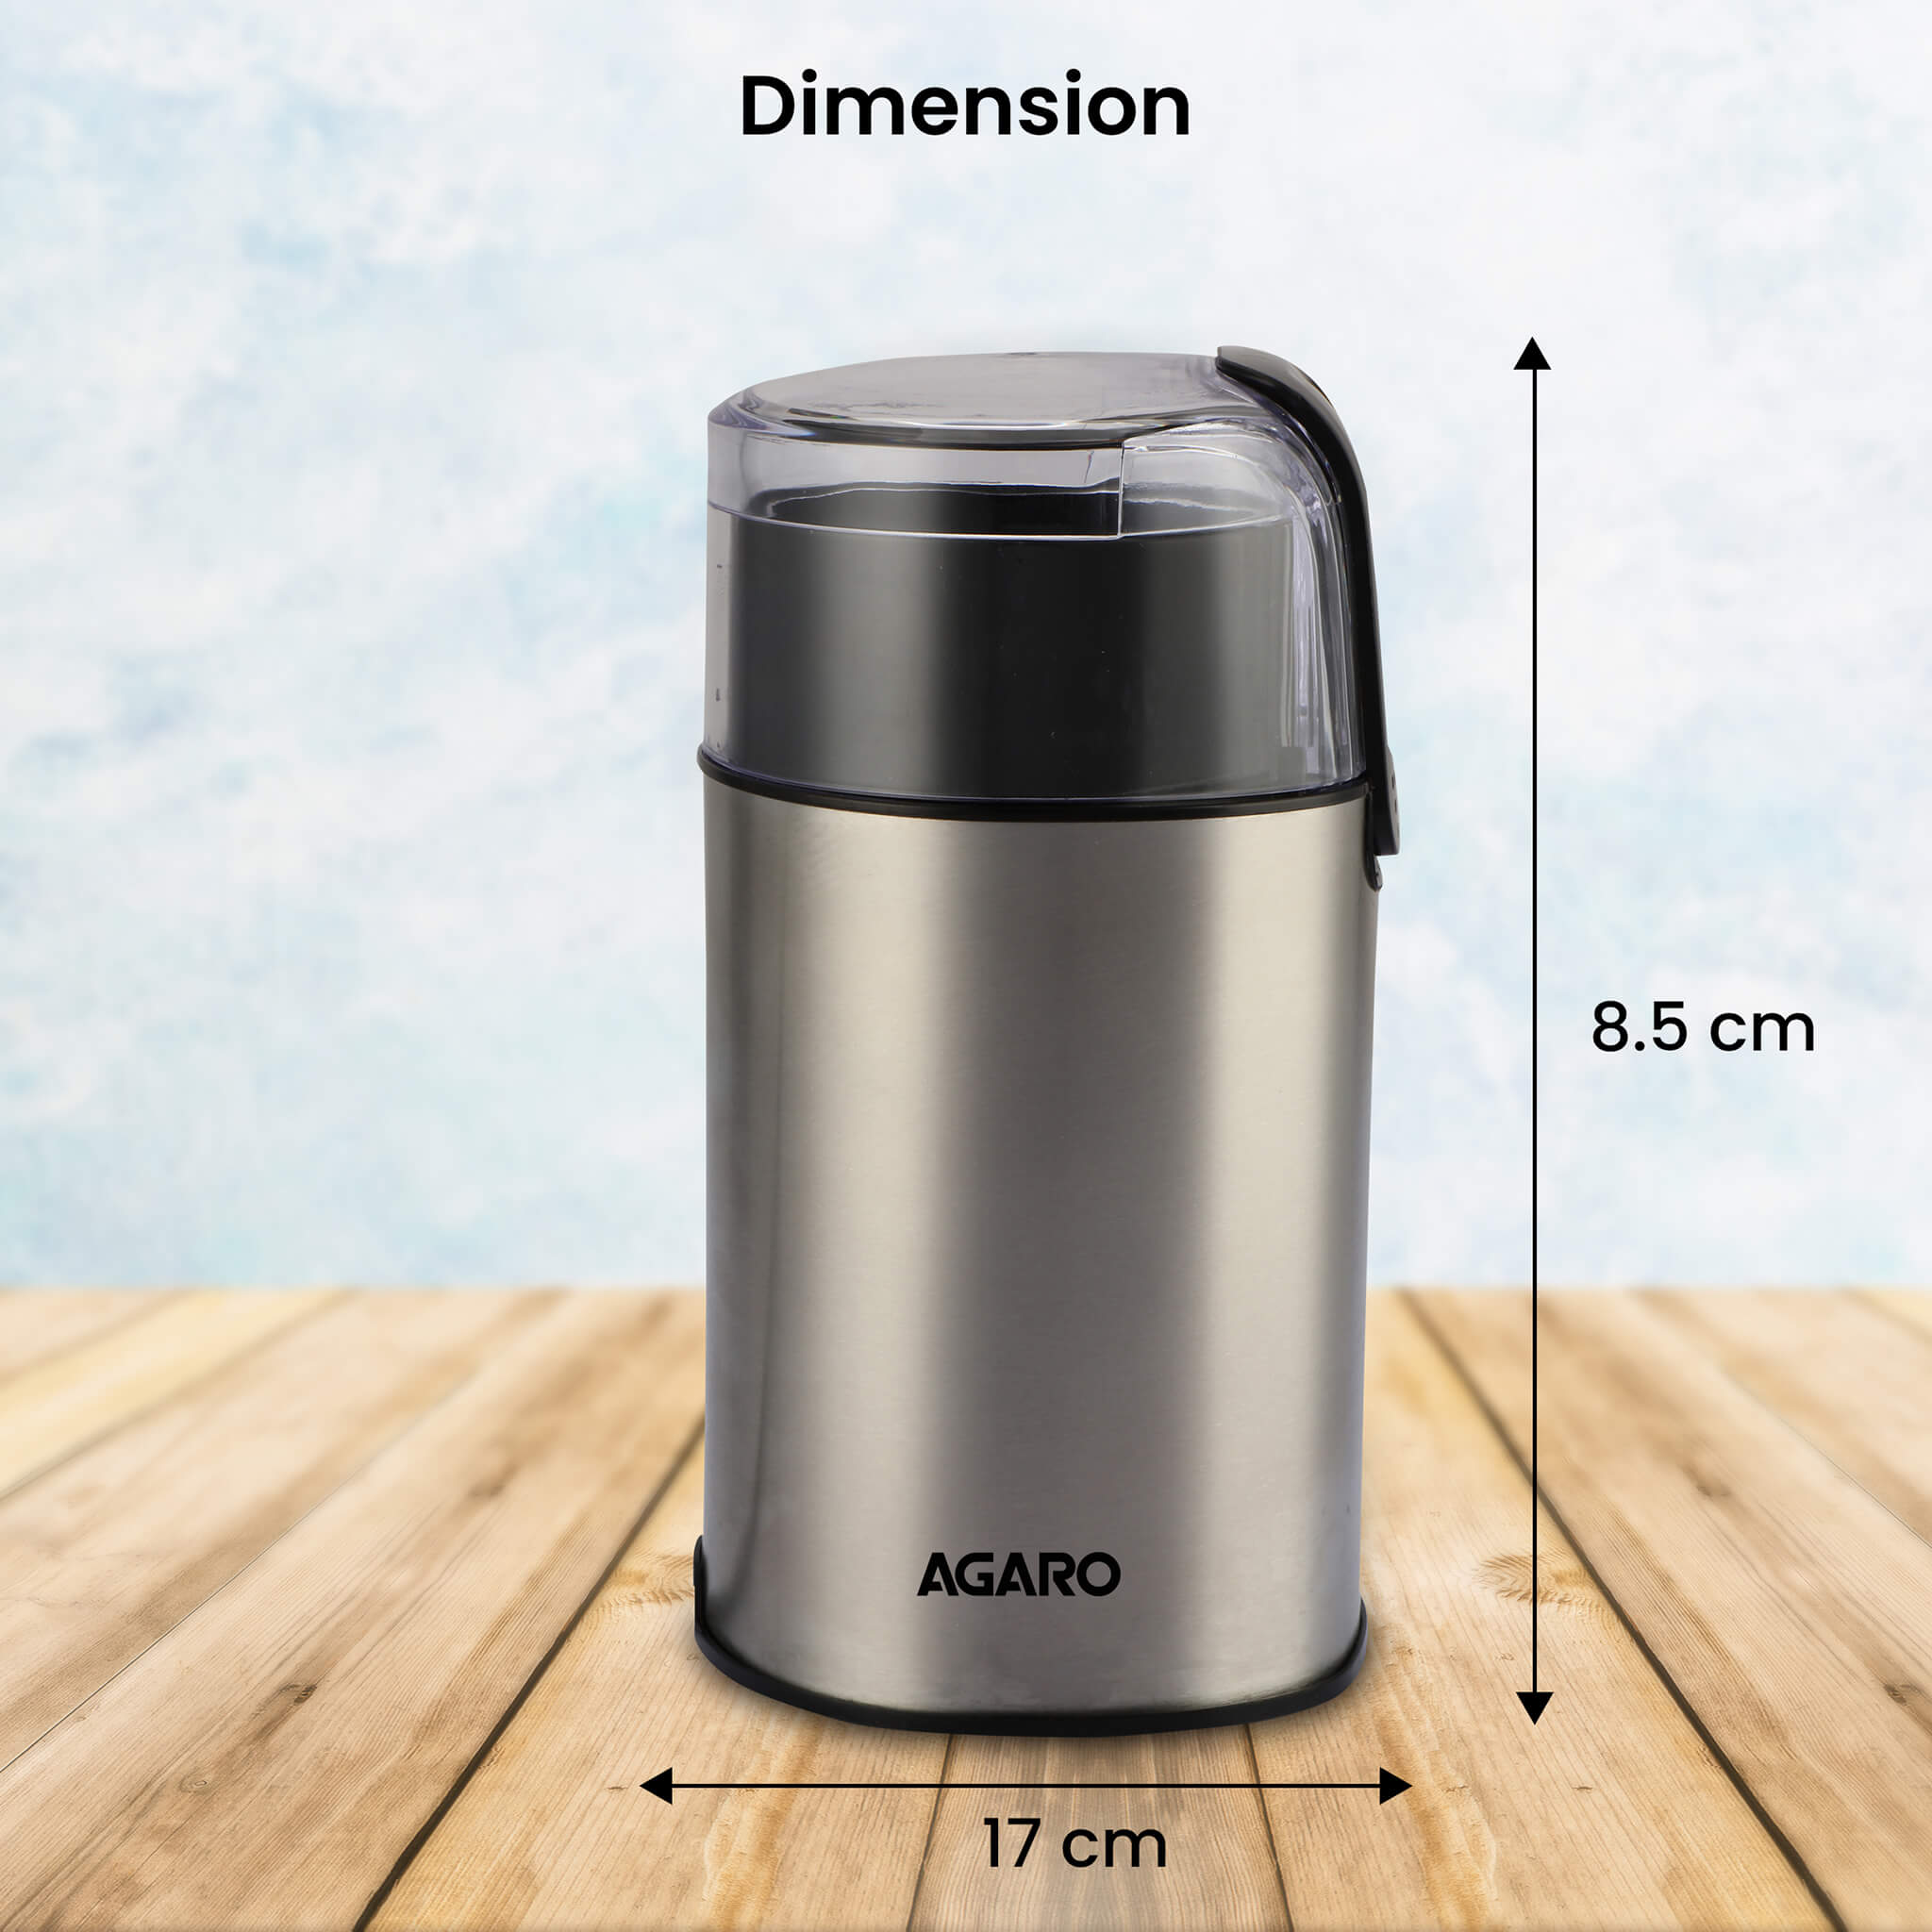 AGARO Elite Manual Coffee Grinder, Ceramic Grinder with Glass jar, 6  Adjustable Settings, Stainless Steel Body, Tooth Handle, No Power, Whole  Bean